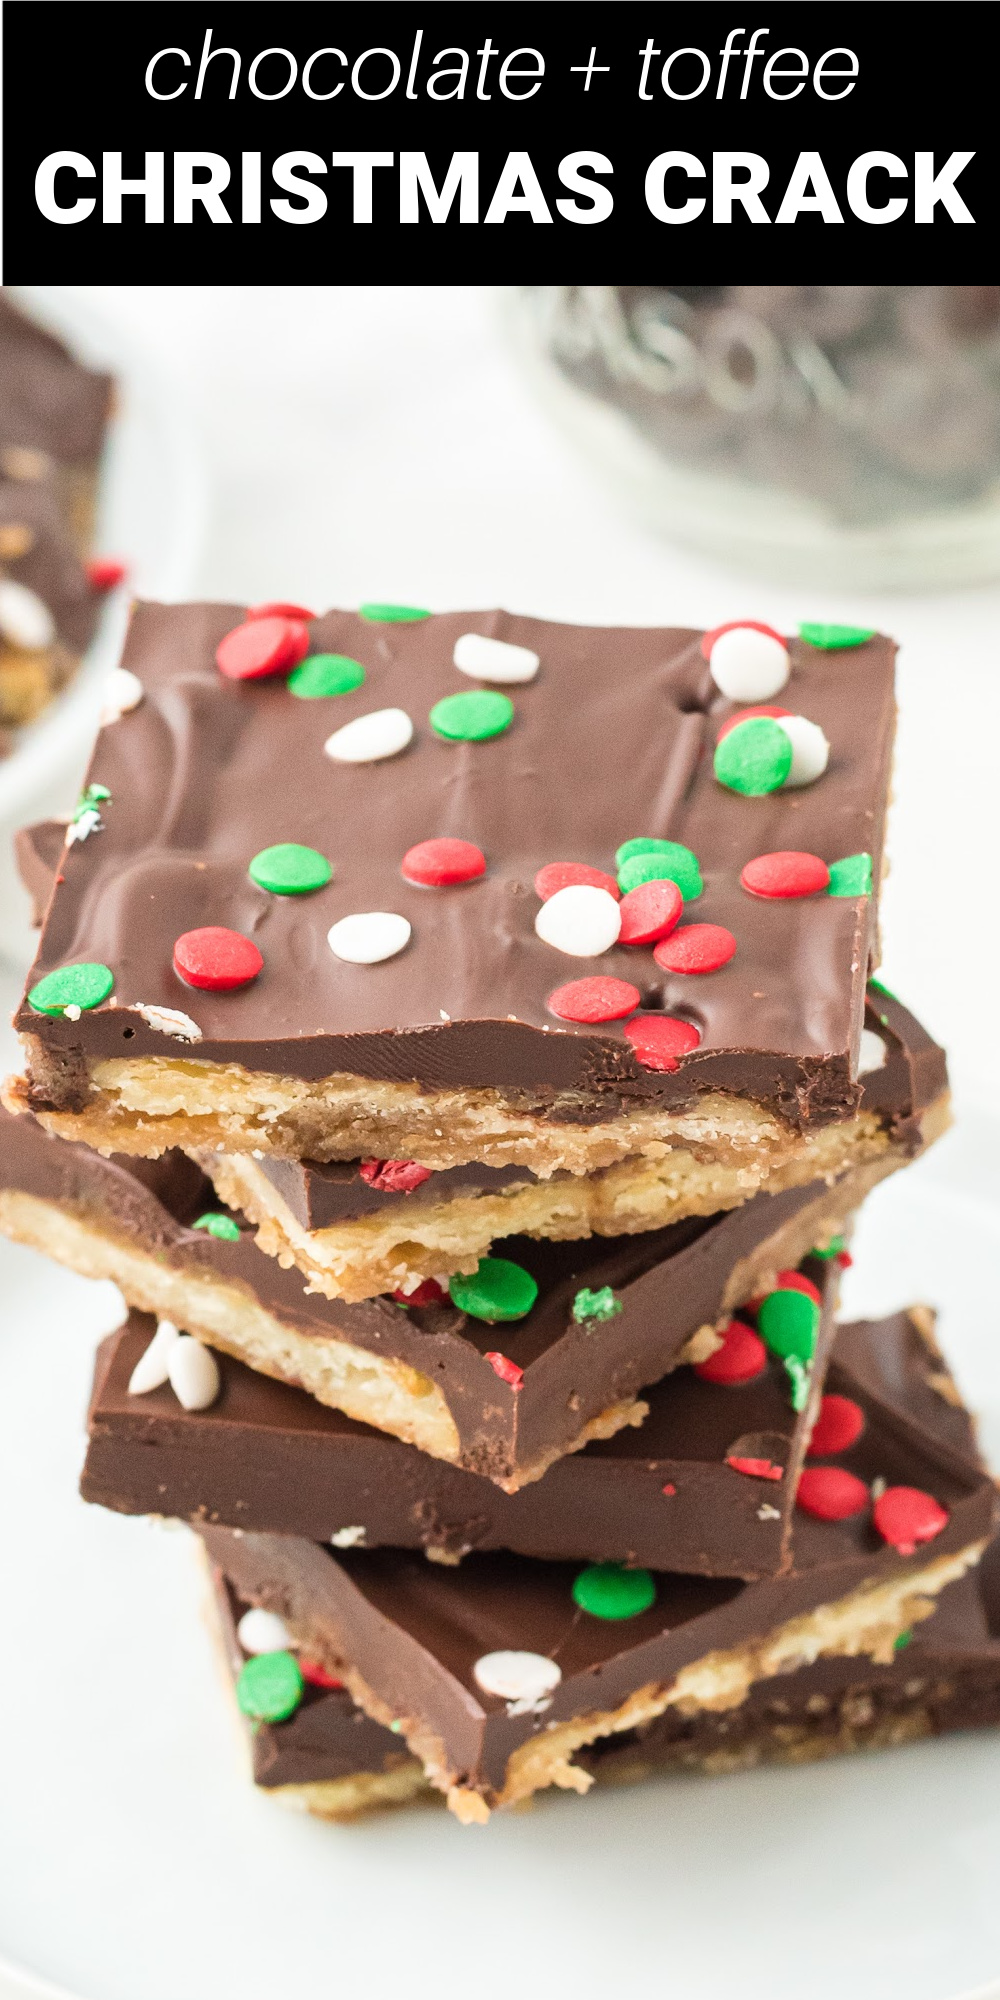 e going to love the flavor and crunch of this easy Christmas Crack Recipe. With a top layer of sweet chocolate and a base of crunchy goodness, this toffee candy is going to be addictive! With 5 simple ingredients, it's simple to make.